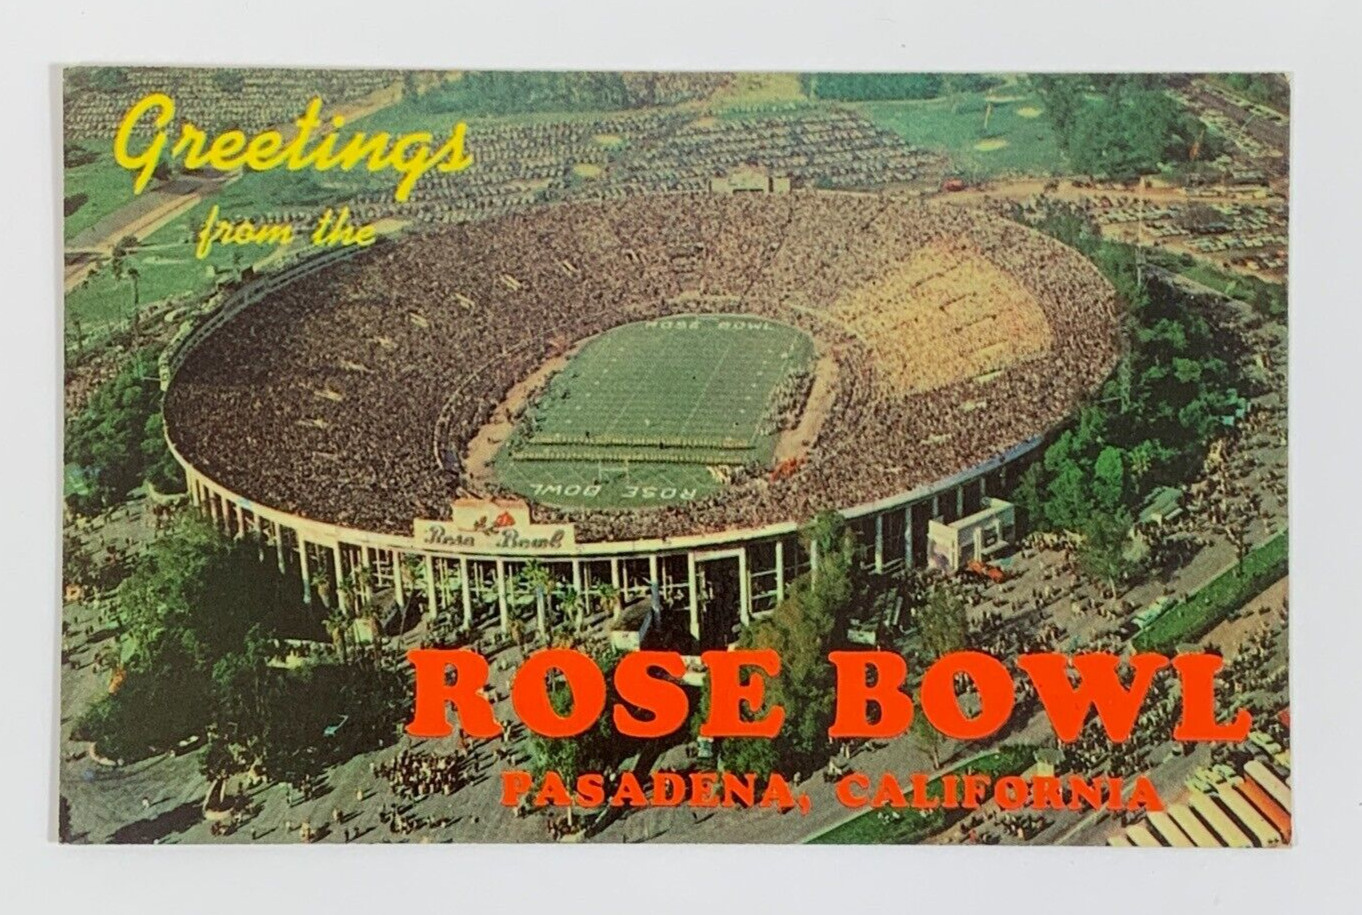 Greetings from the Rose Bowl Pasadena California Postcard Unposted Aerial View